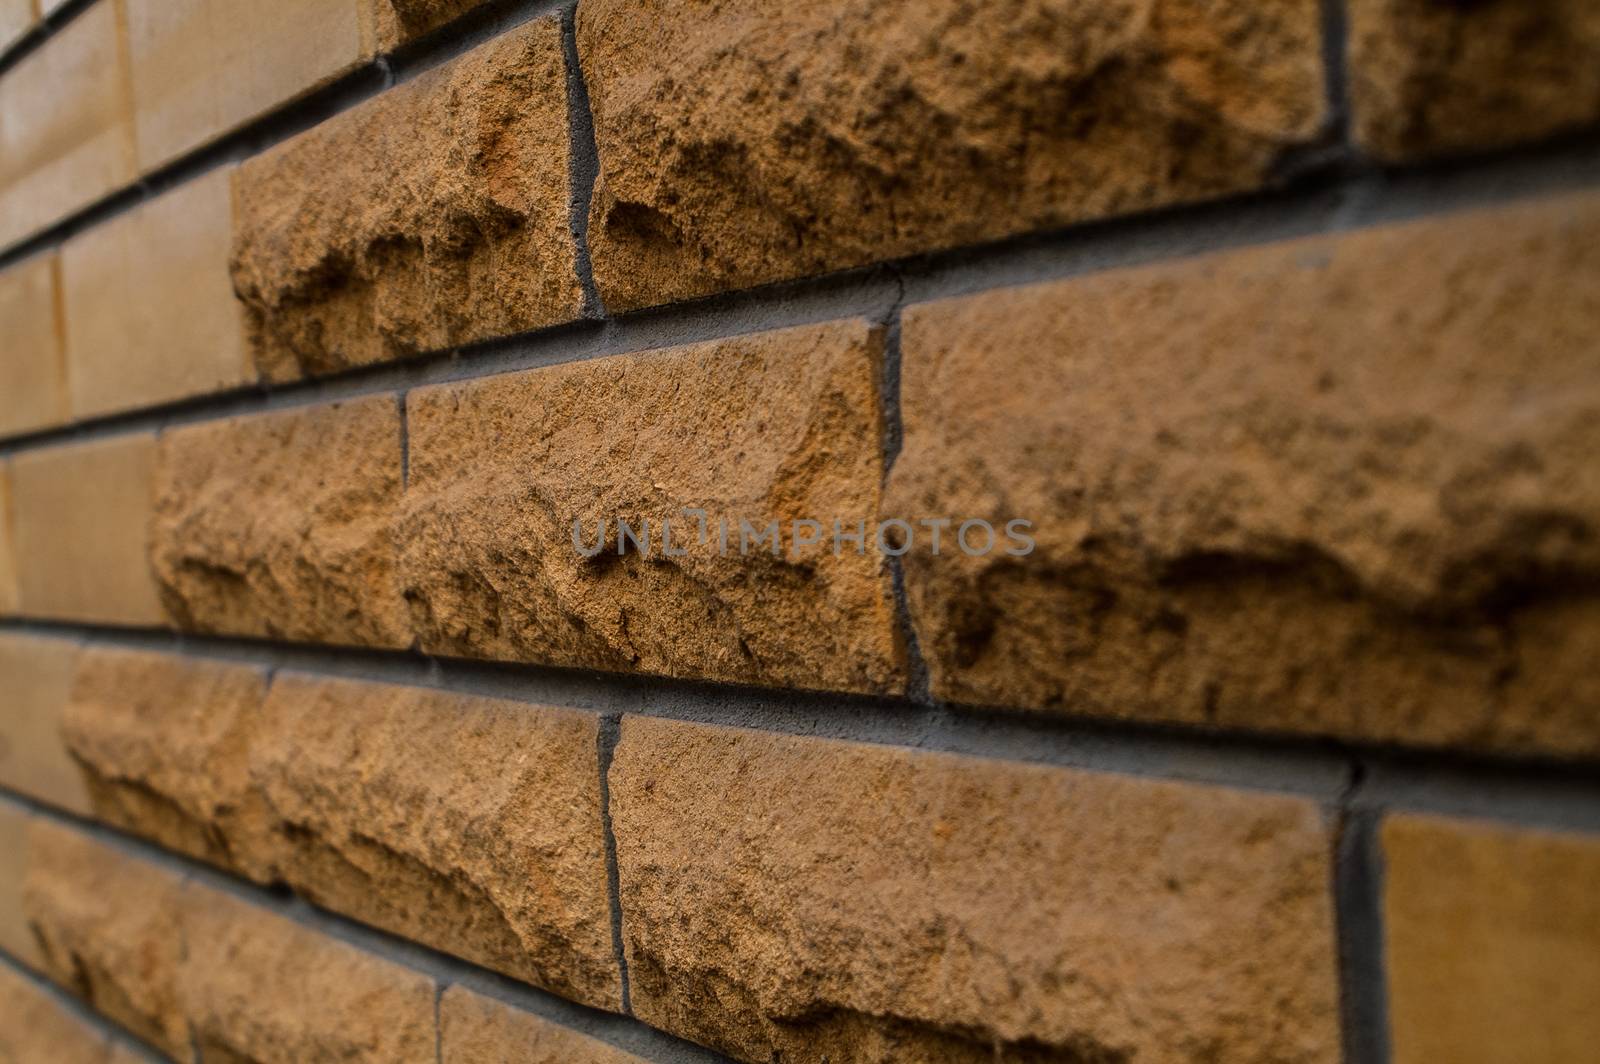 Brick background and wall from a different brick